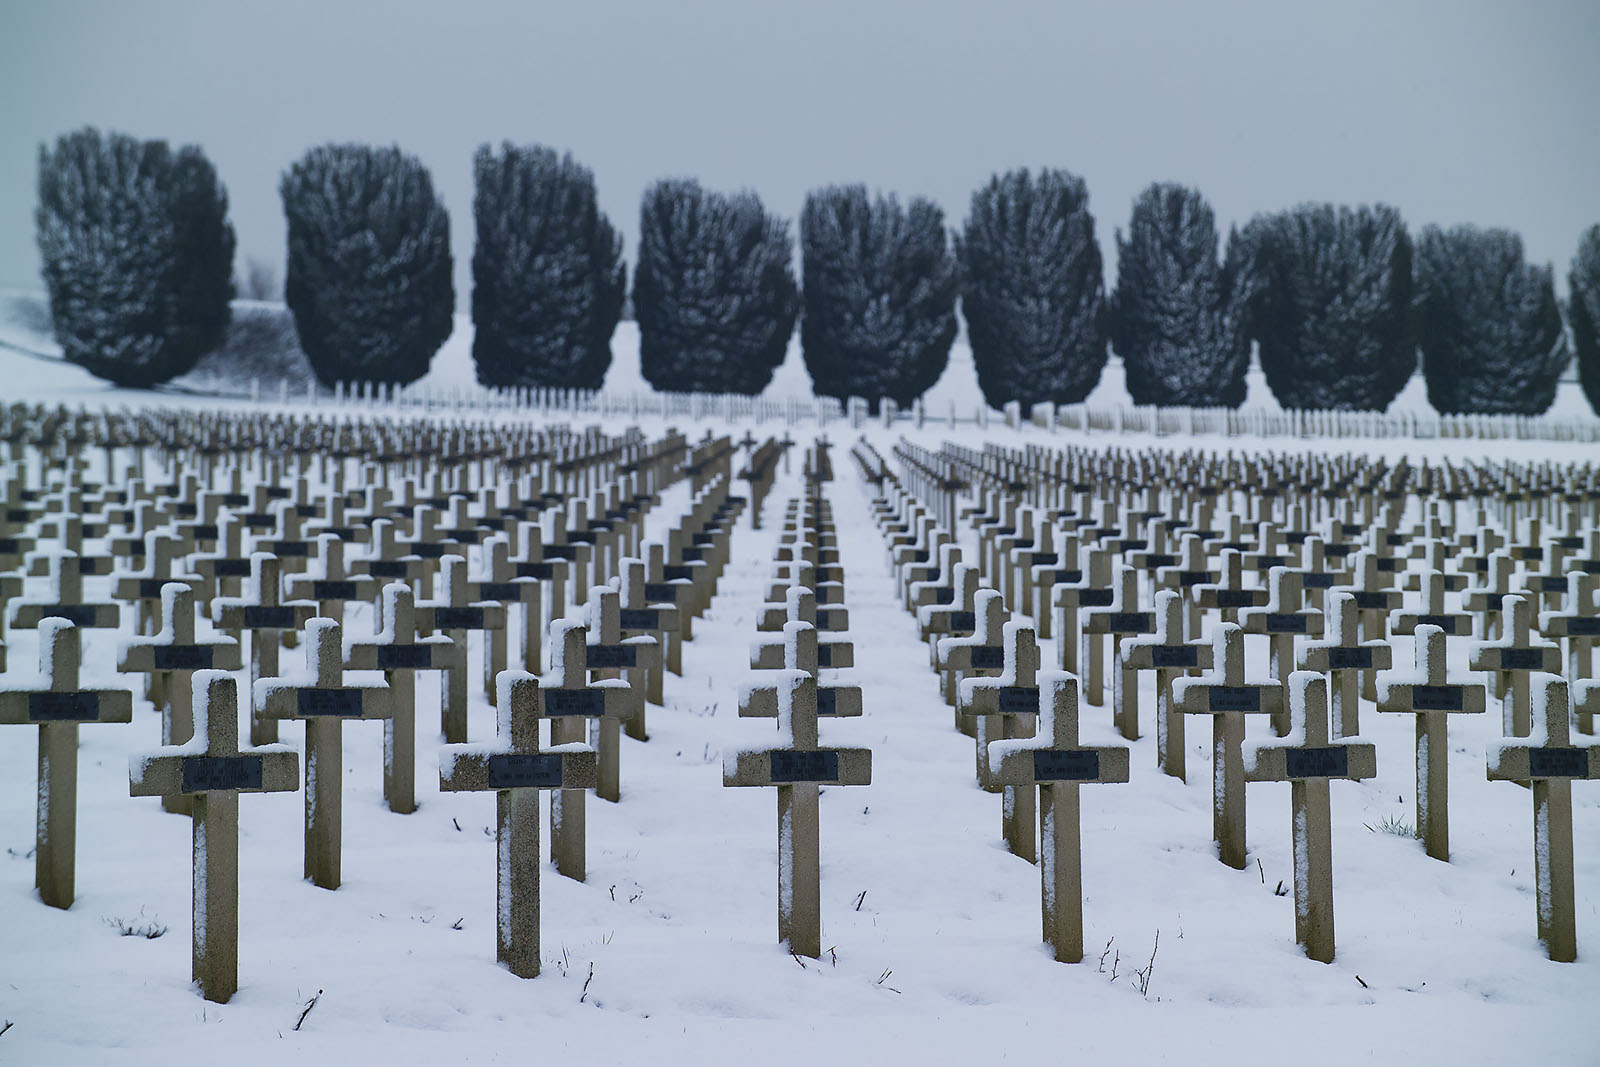 Modern photograph of a snowy field with large manicured trees in the background. In the foreground, rows of crosses are planted in the field.